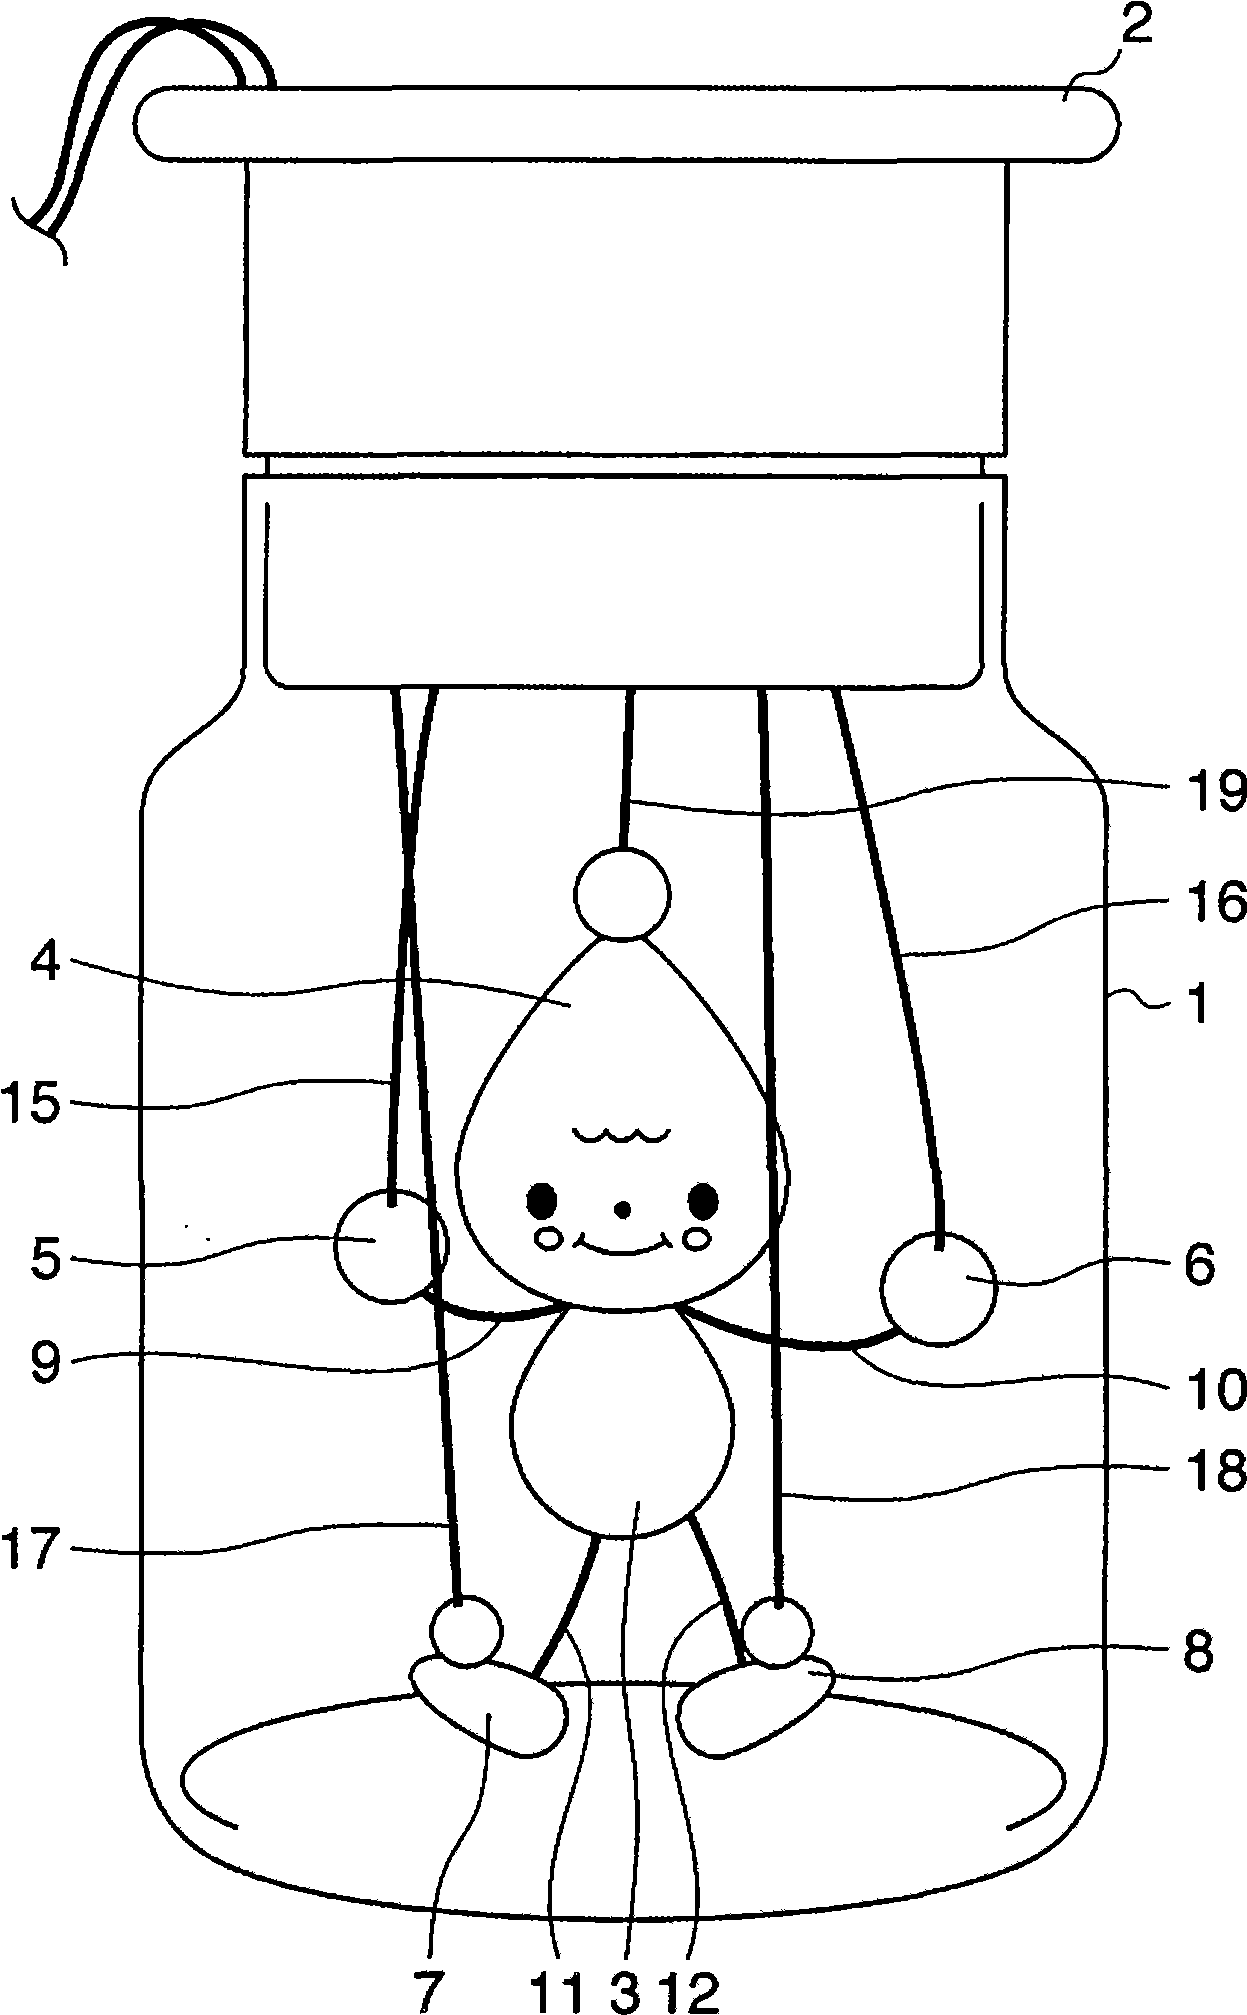 Marionette toy